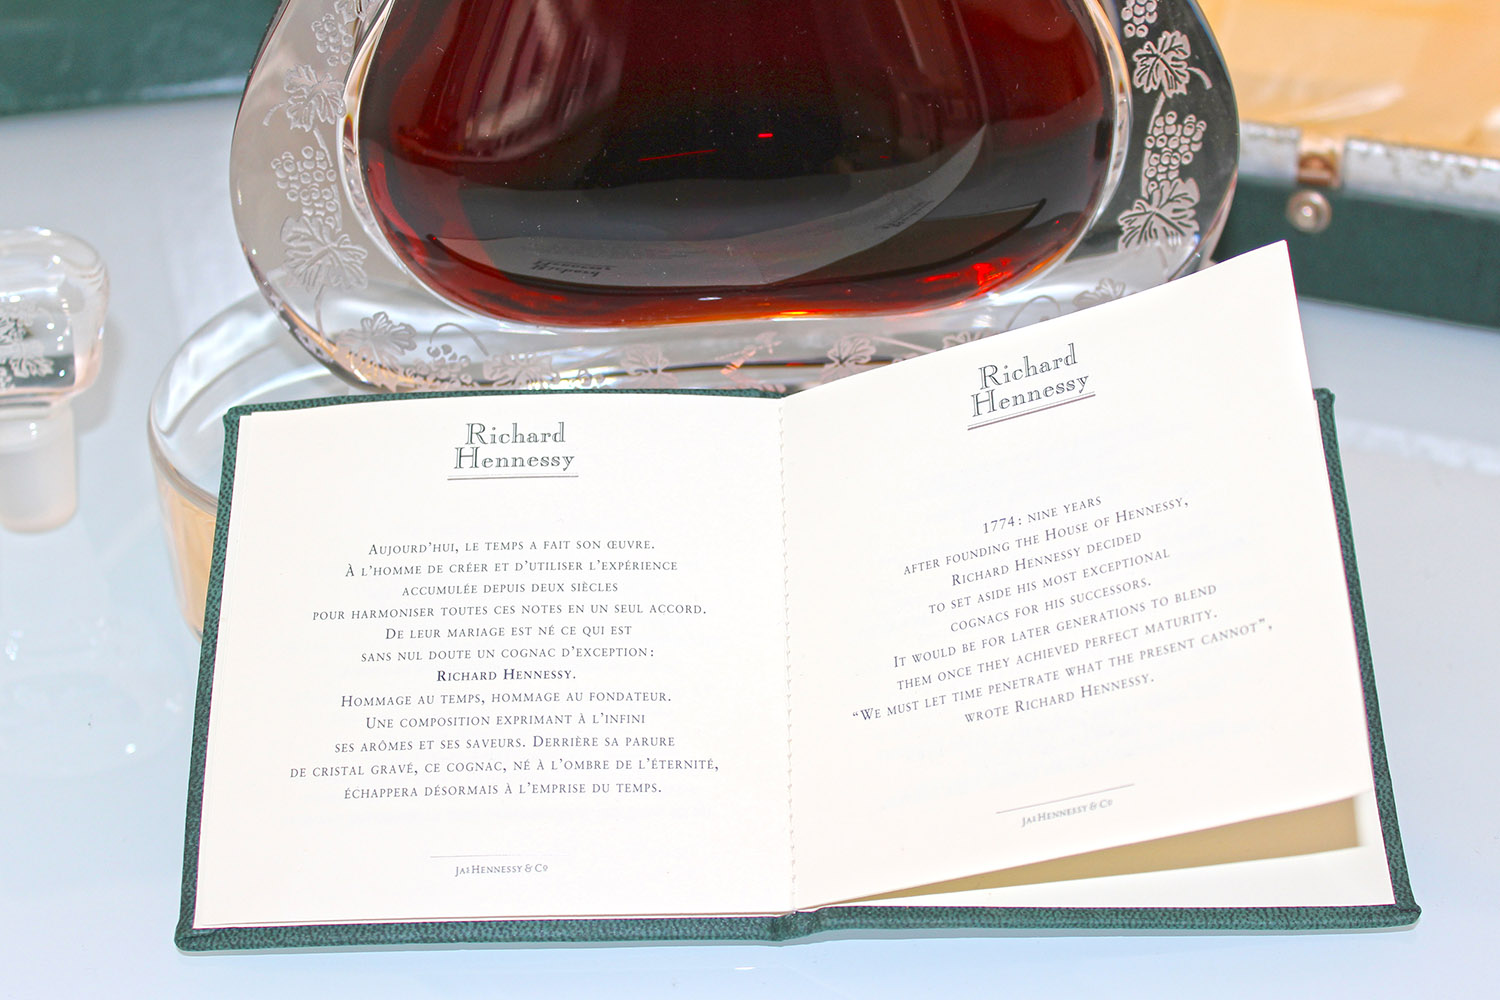 Richard Hennessy Cognac 1990s incl Display booklet 2